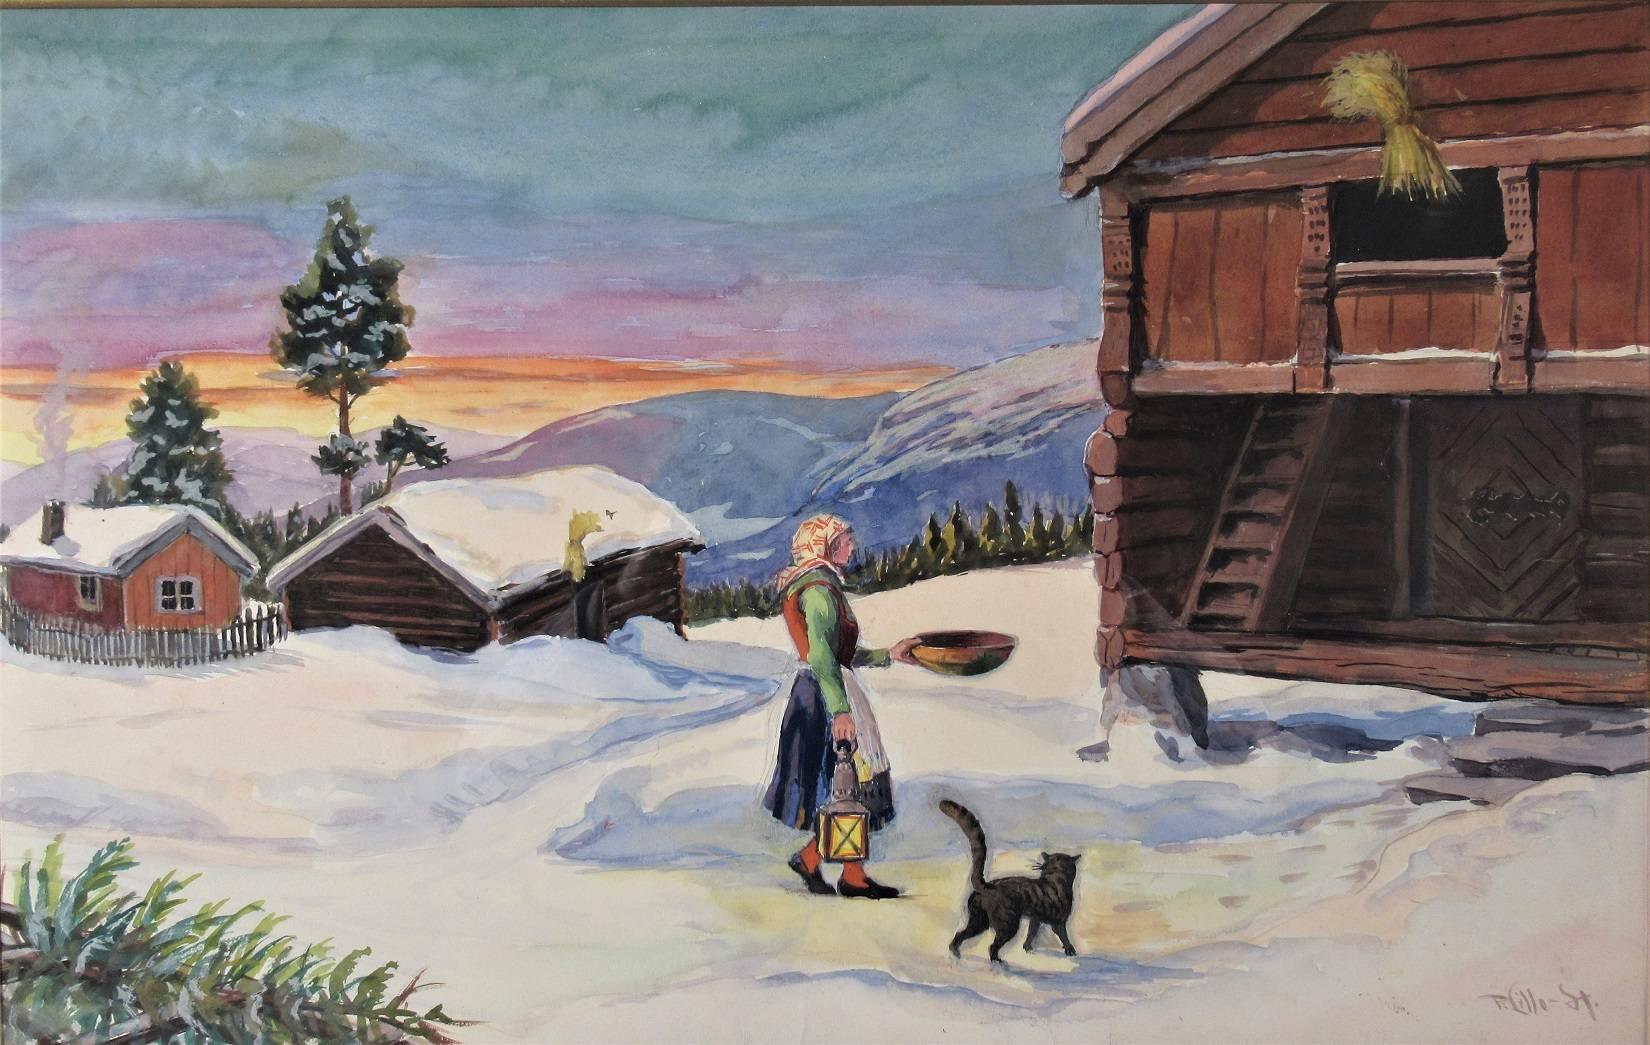 Winter Landscape, with Woman and Cat - Art by Paul Lilo Stenberg